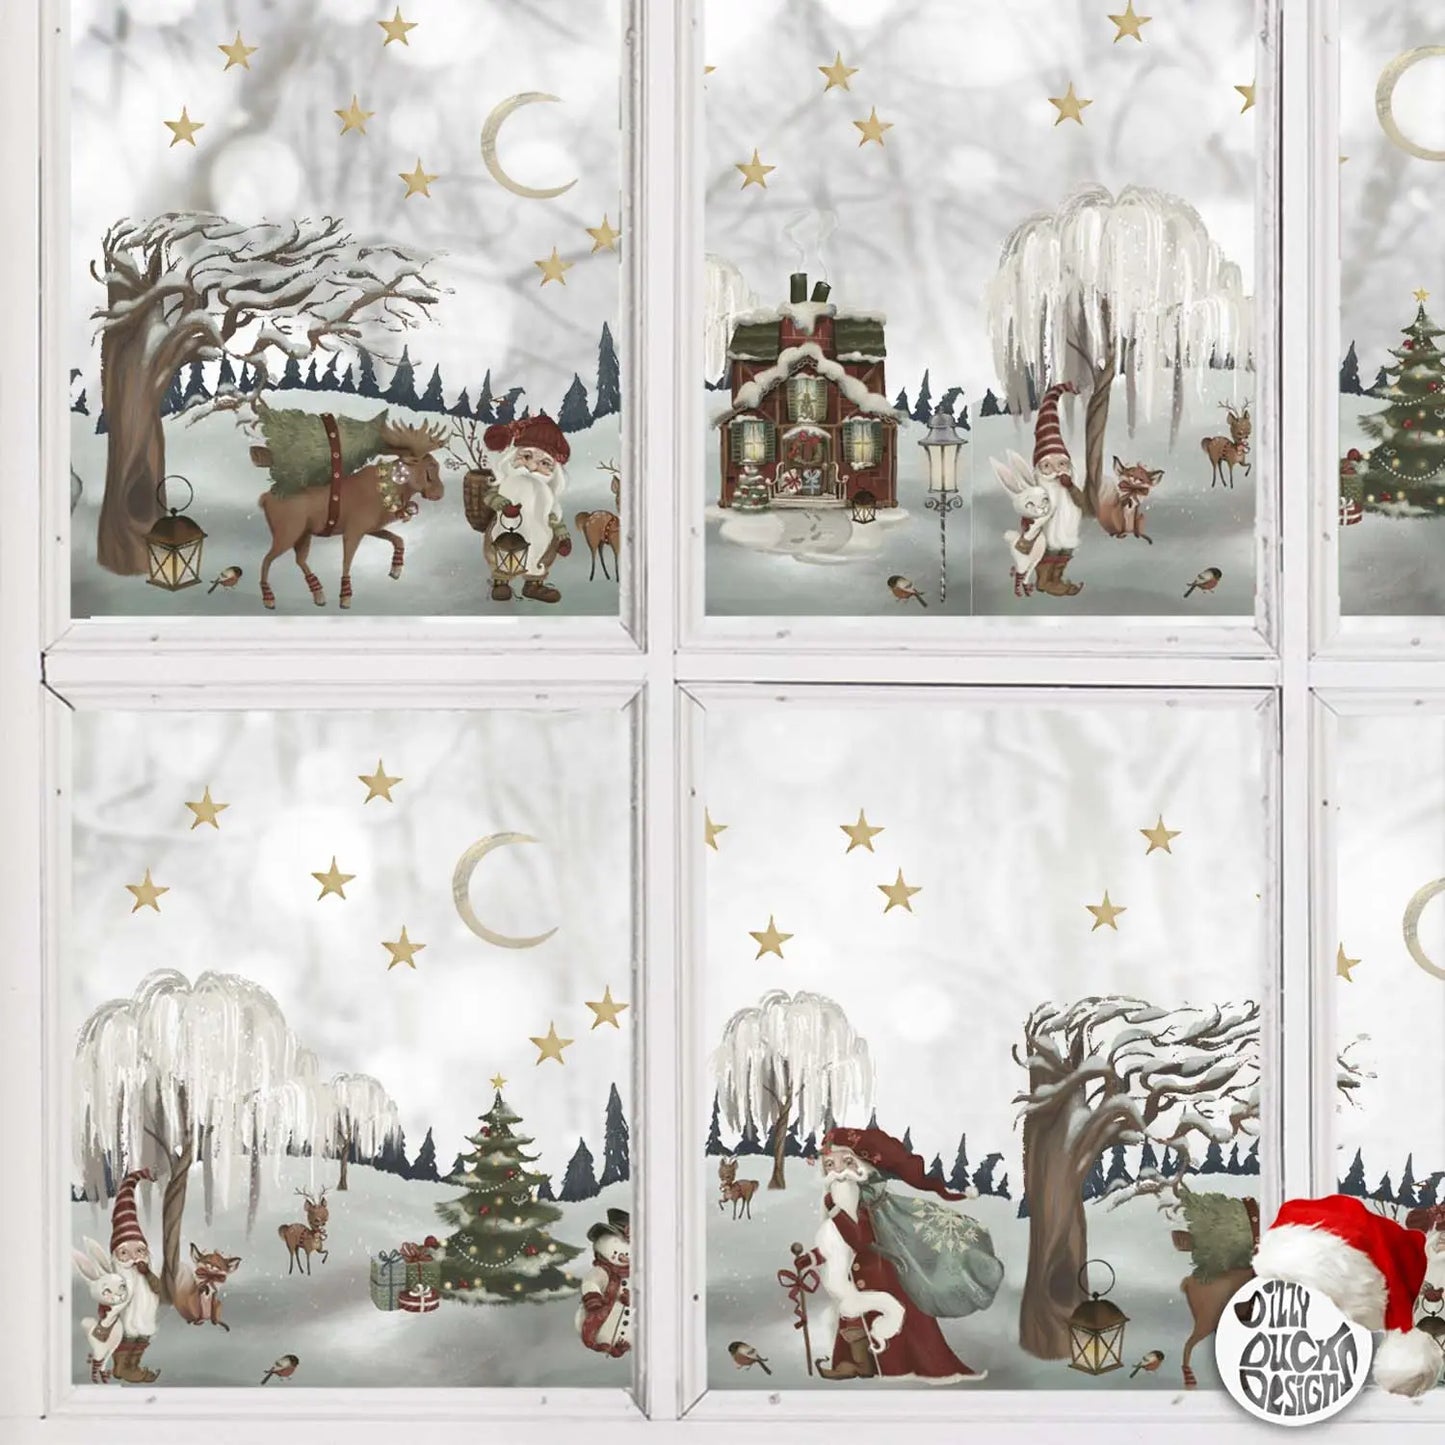 Decal Father Christmas Winter Scene Border Window Decal Dizzy Duck Designs